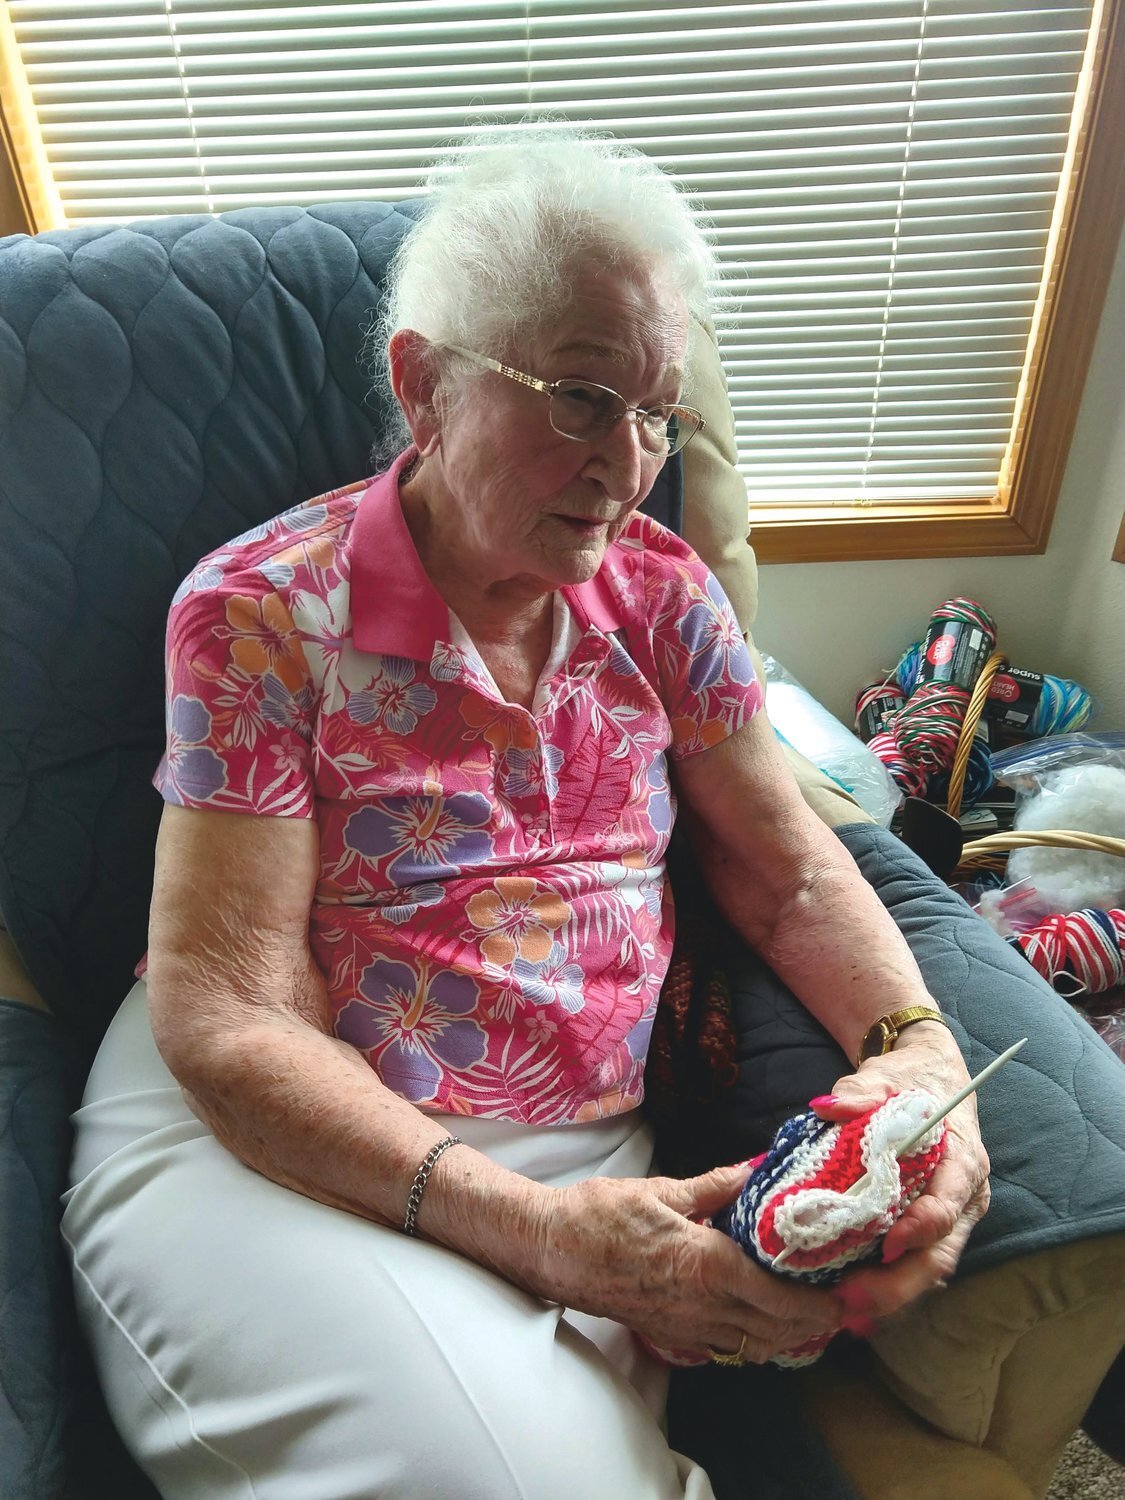 Shirley (French) Nelson, who turned 100 in July, holds a “prayer bear” that she knitted in this recent photo.